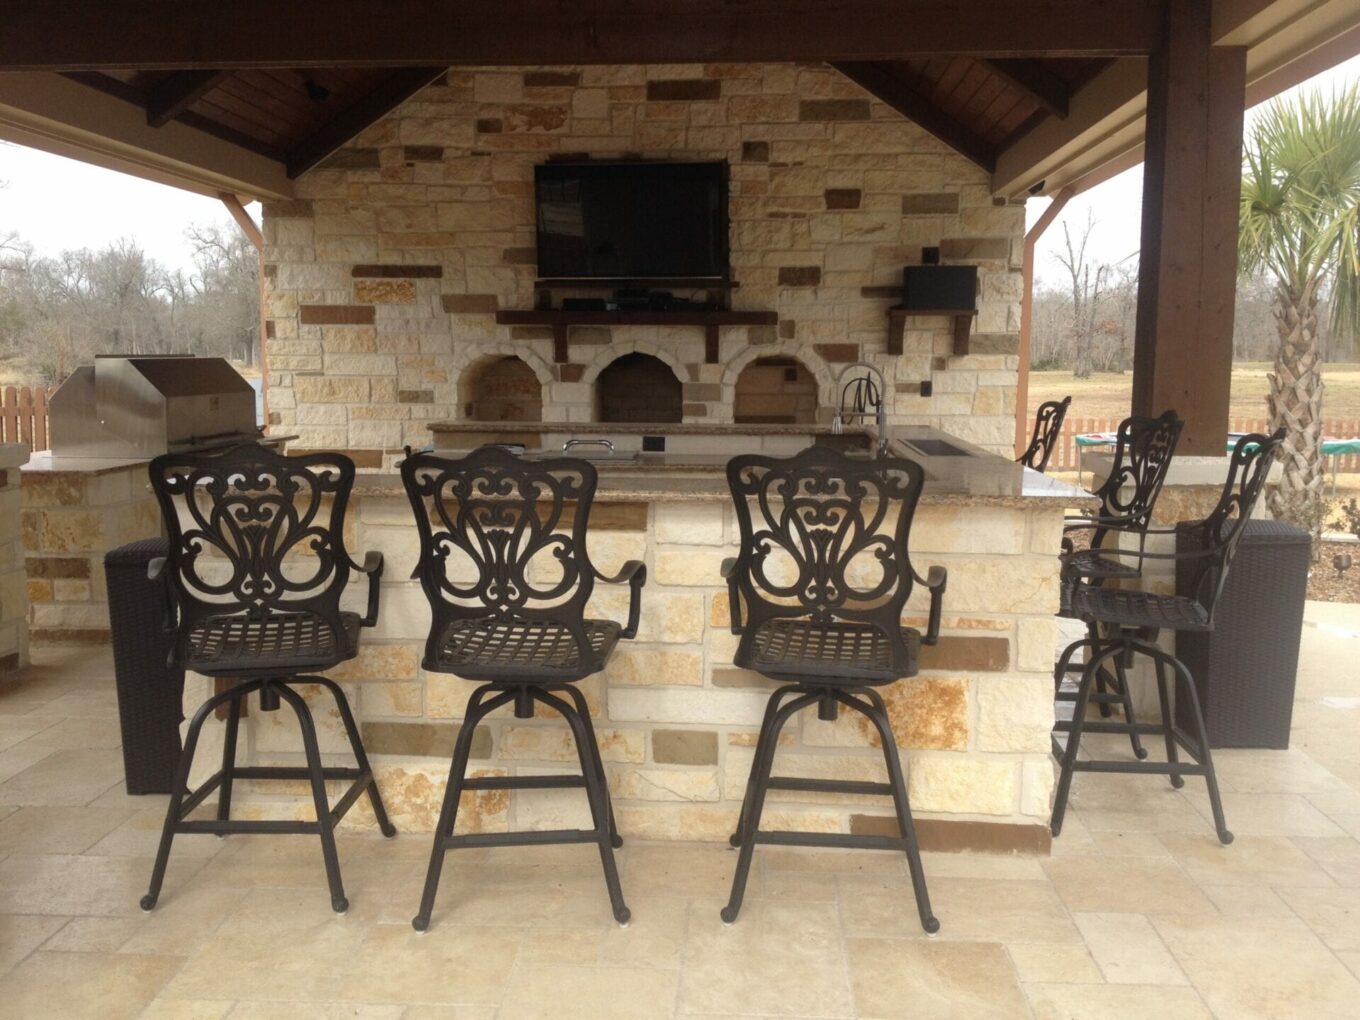 A group of chairs and stools in front of an outdoor fireplace.